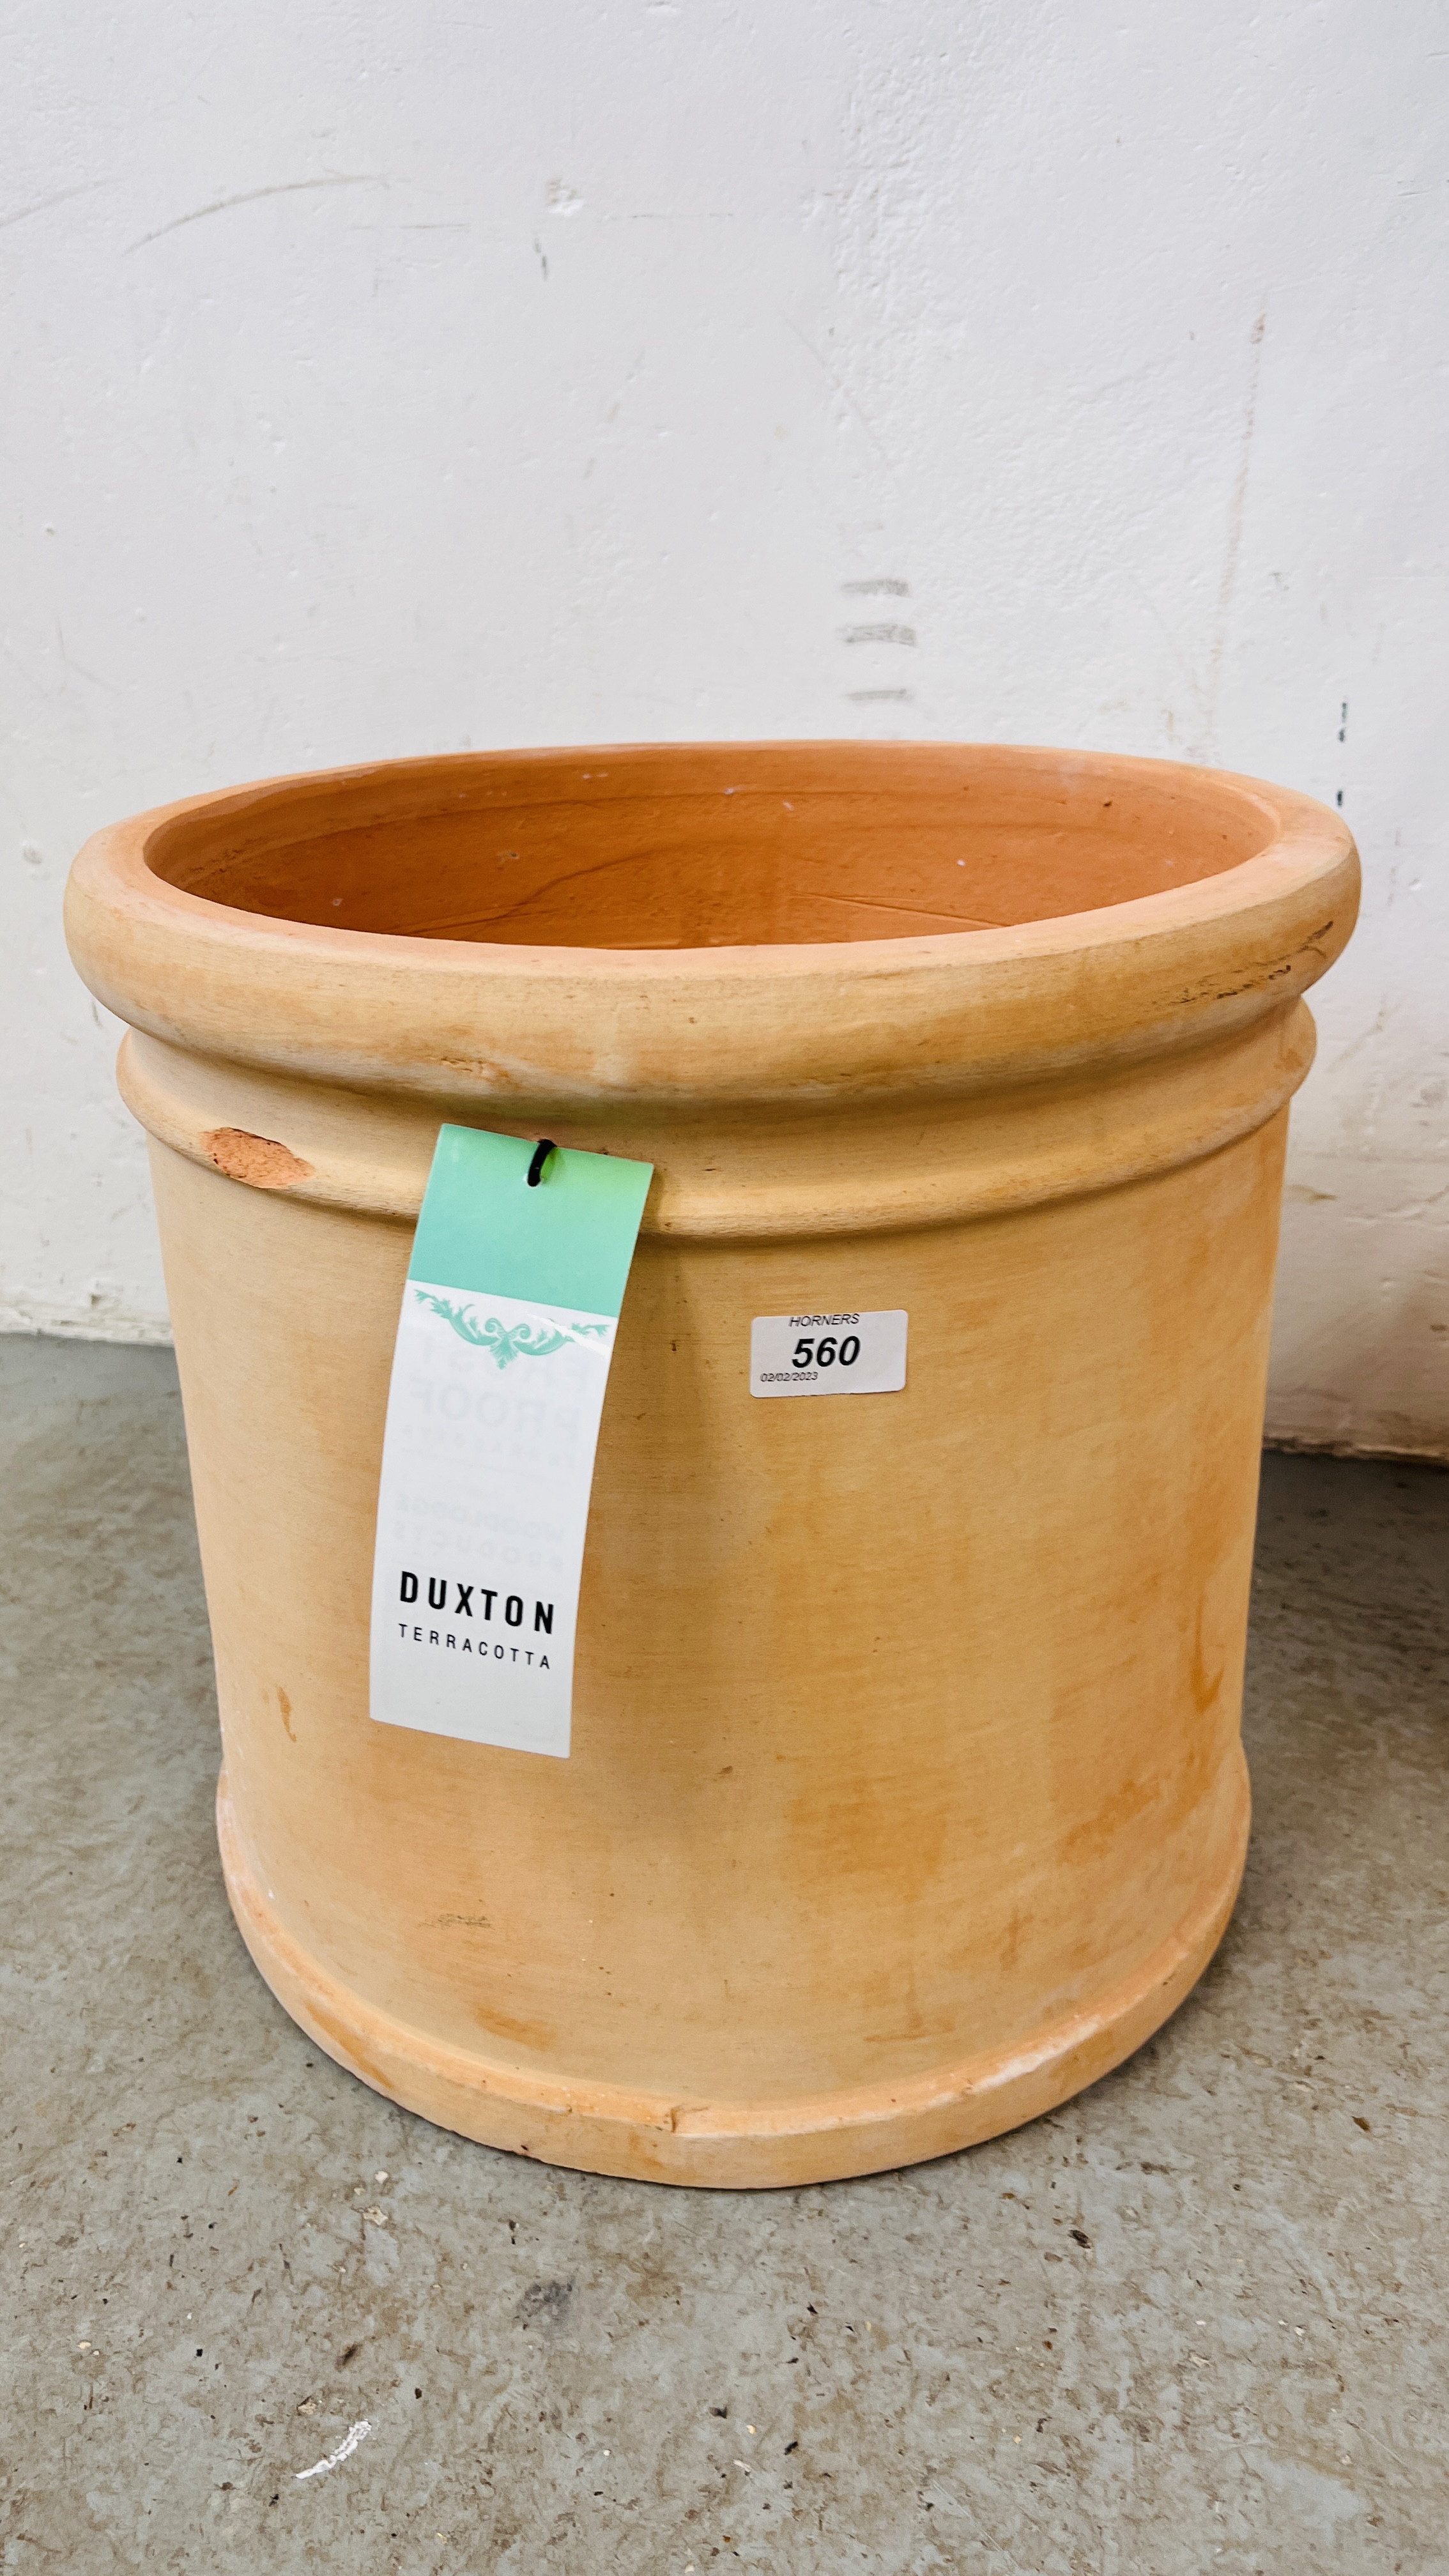 2 LARGE TERRACOTTA PLANT POTS INCLUDE DAXTON AND ARTIFICIAL TREE (THE LARGEST POT - DIAMETER 36CM) - Image 2 of 4